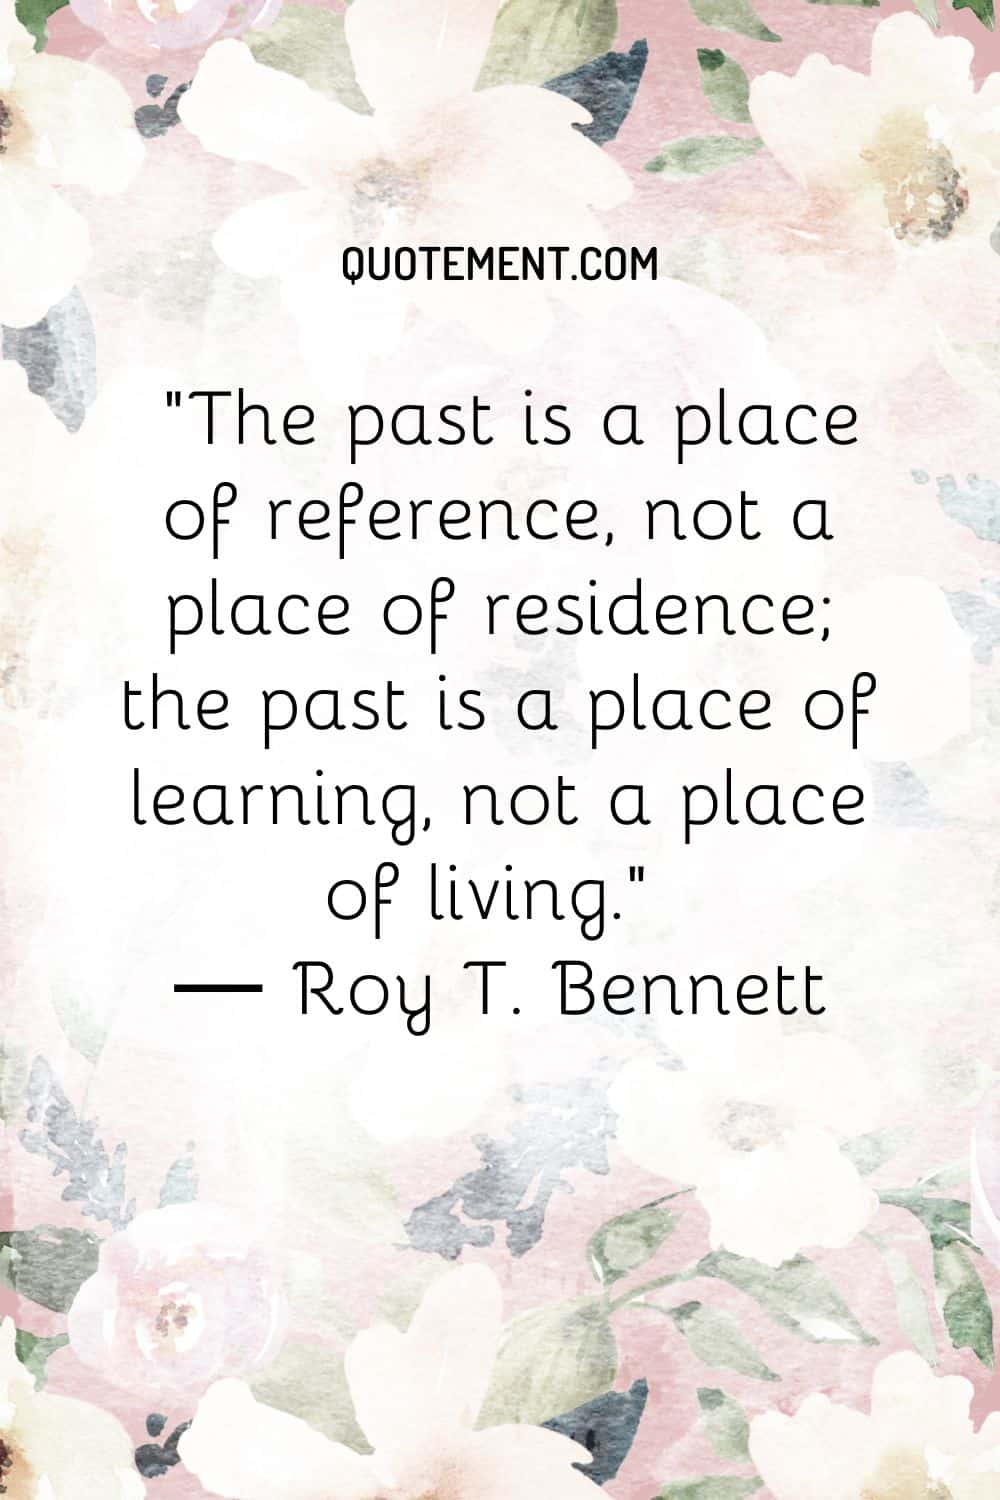 The past is a place of reference, not a place of residence; the past is a place of learning, not a place of living